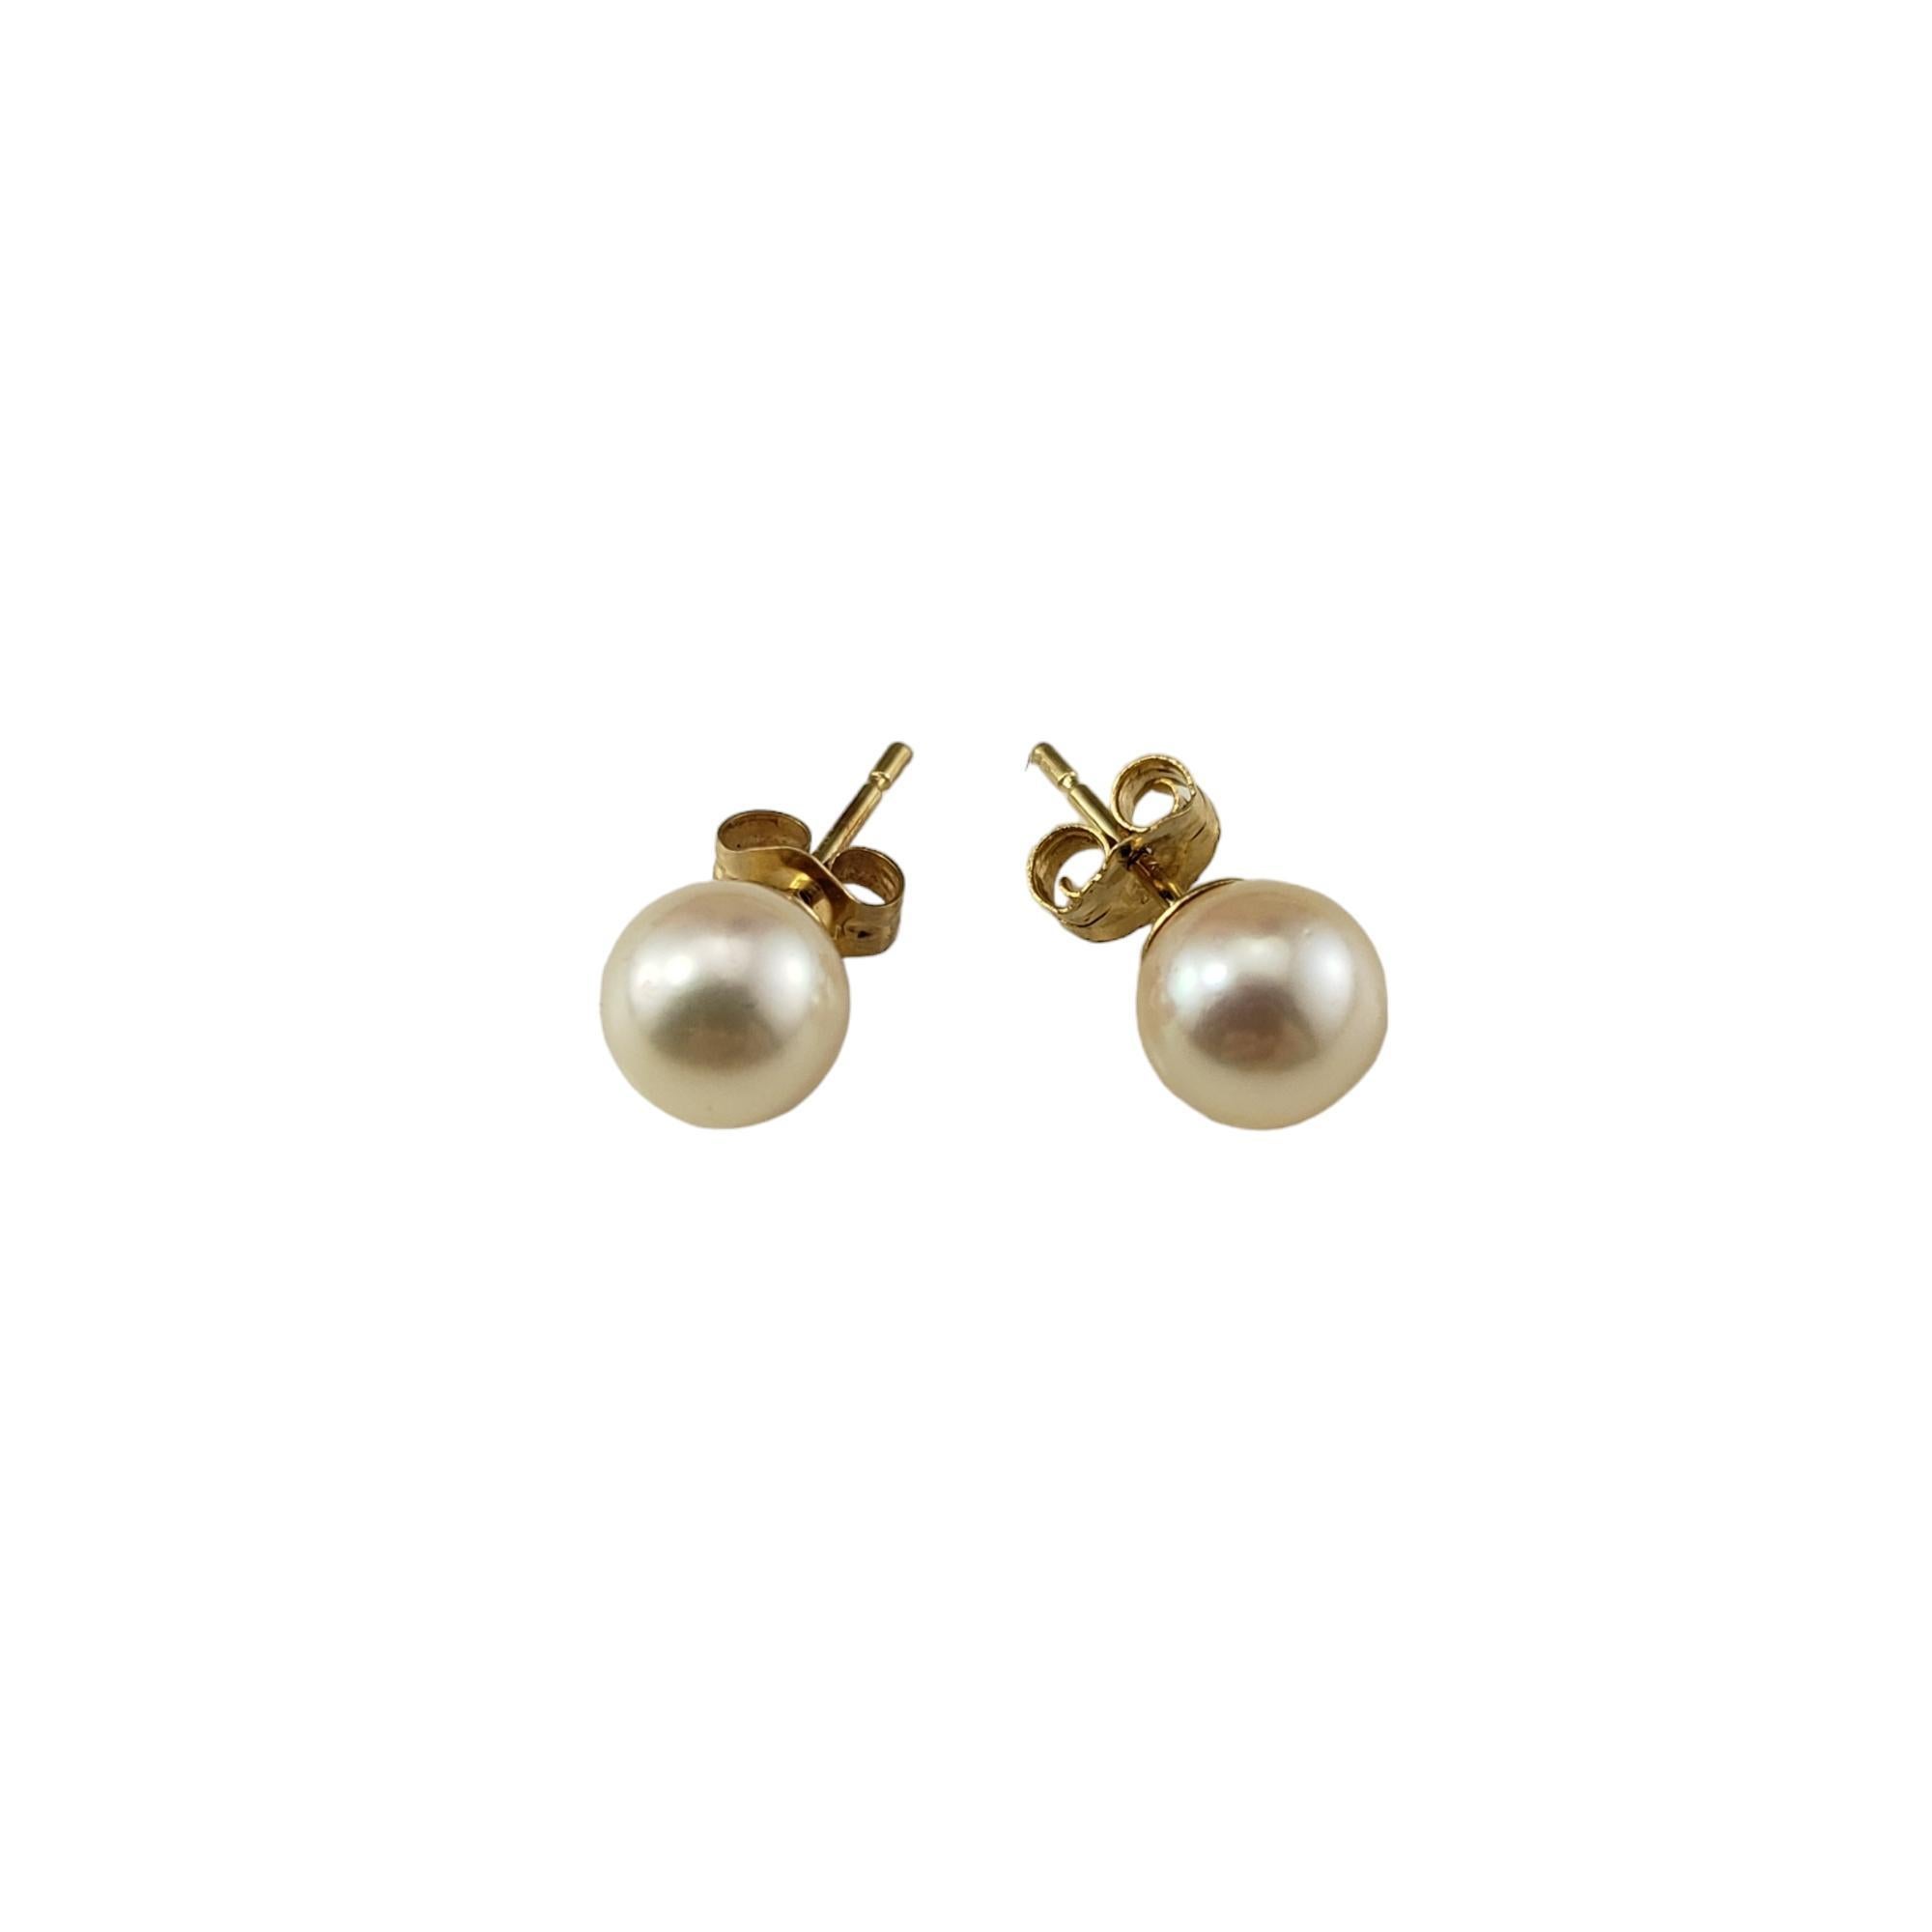 Vintage 14K Yellow Gold Pearl Stud Earrings-

These elegant stud earrings each features one cultured pearl (7 mm) set in classic 14K yellow gold.  Push back closures.

Size:  7 mm

Stamped: 14K

Weight: 0.8 dwt. / 1.3 gr.

Very good condition,